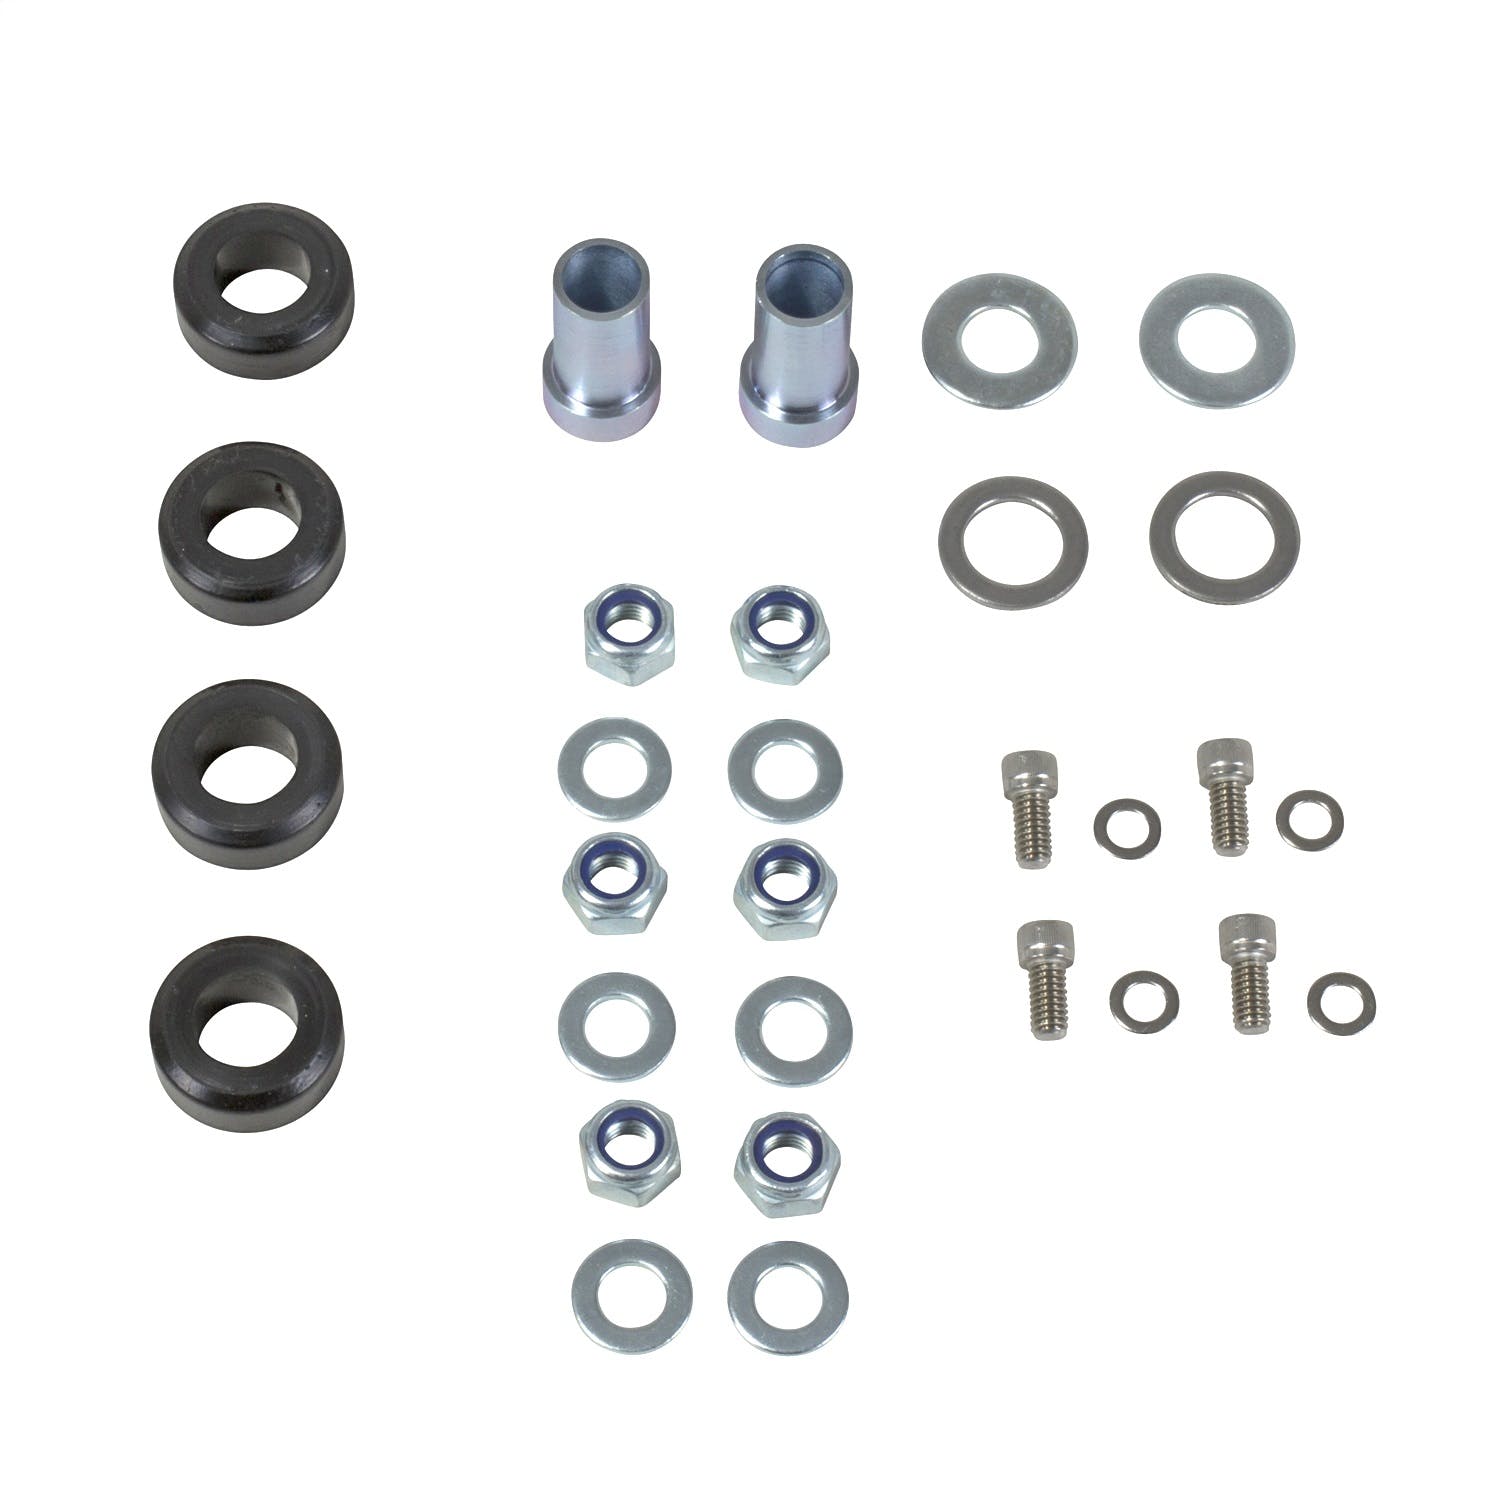 BBK Performance Parts 25272 Alignment Caster/Camber Hardware Kit